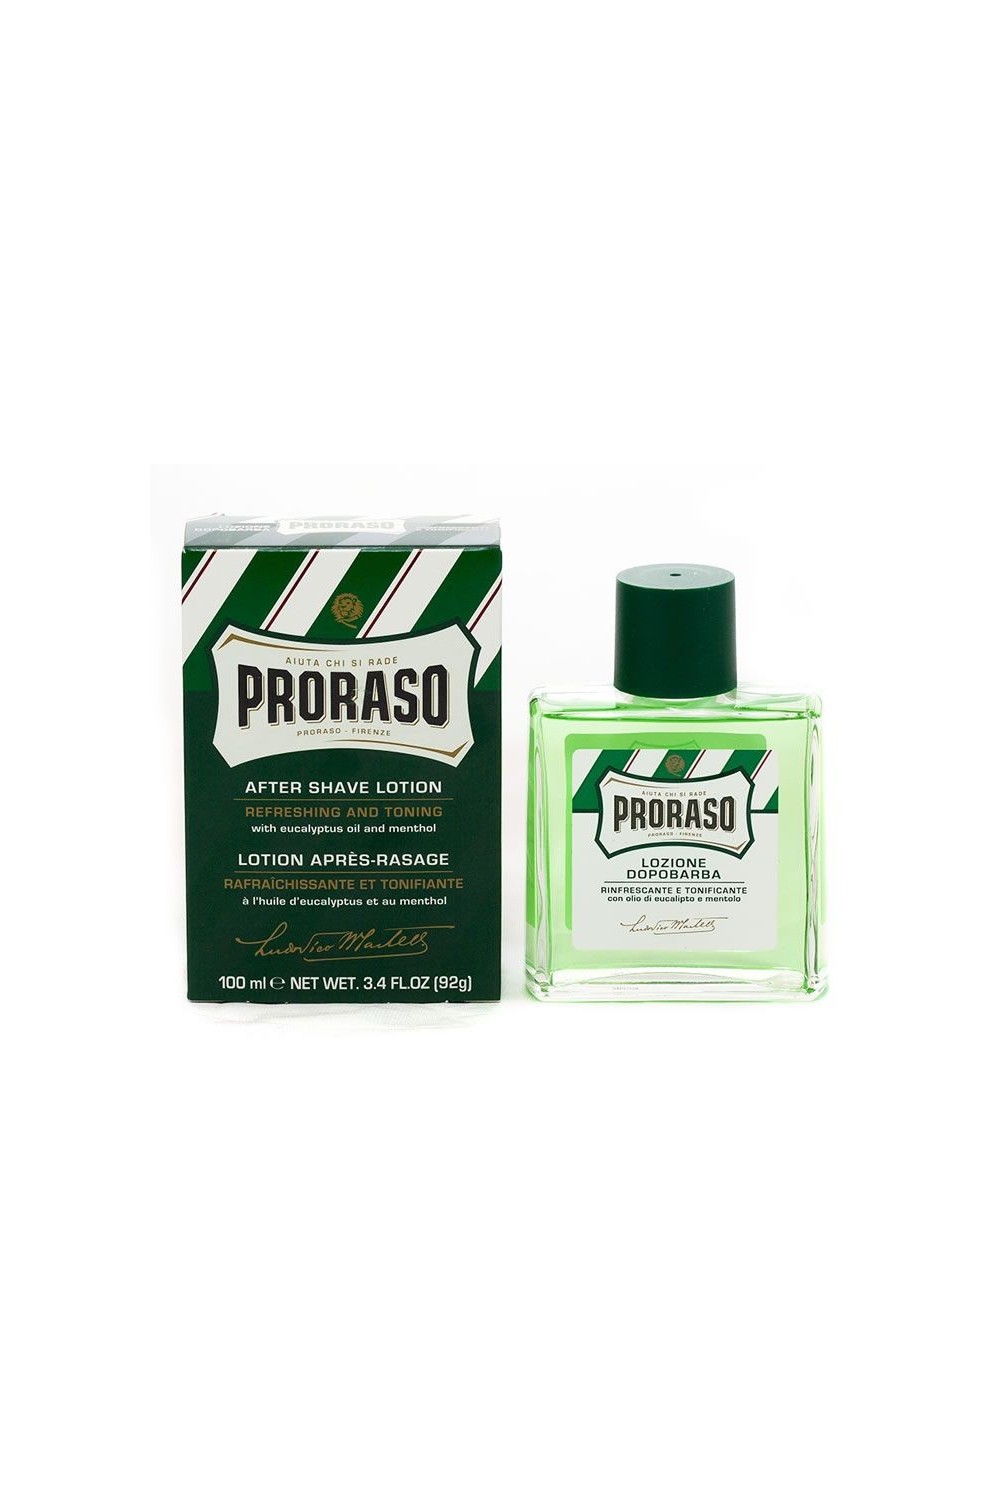 Proraso After Shave Lotion 100ml